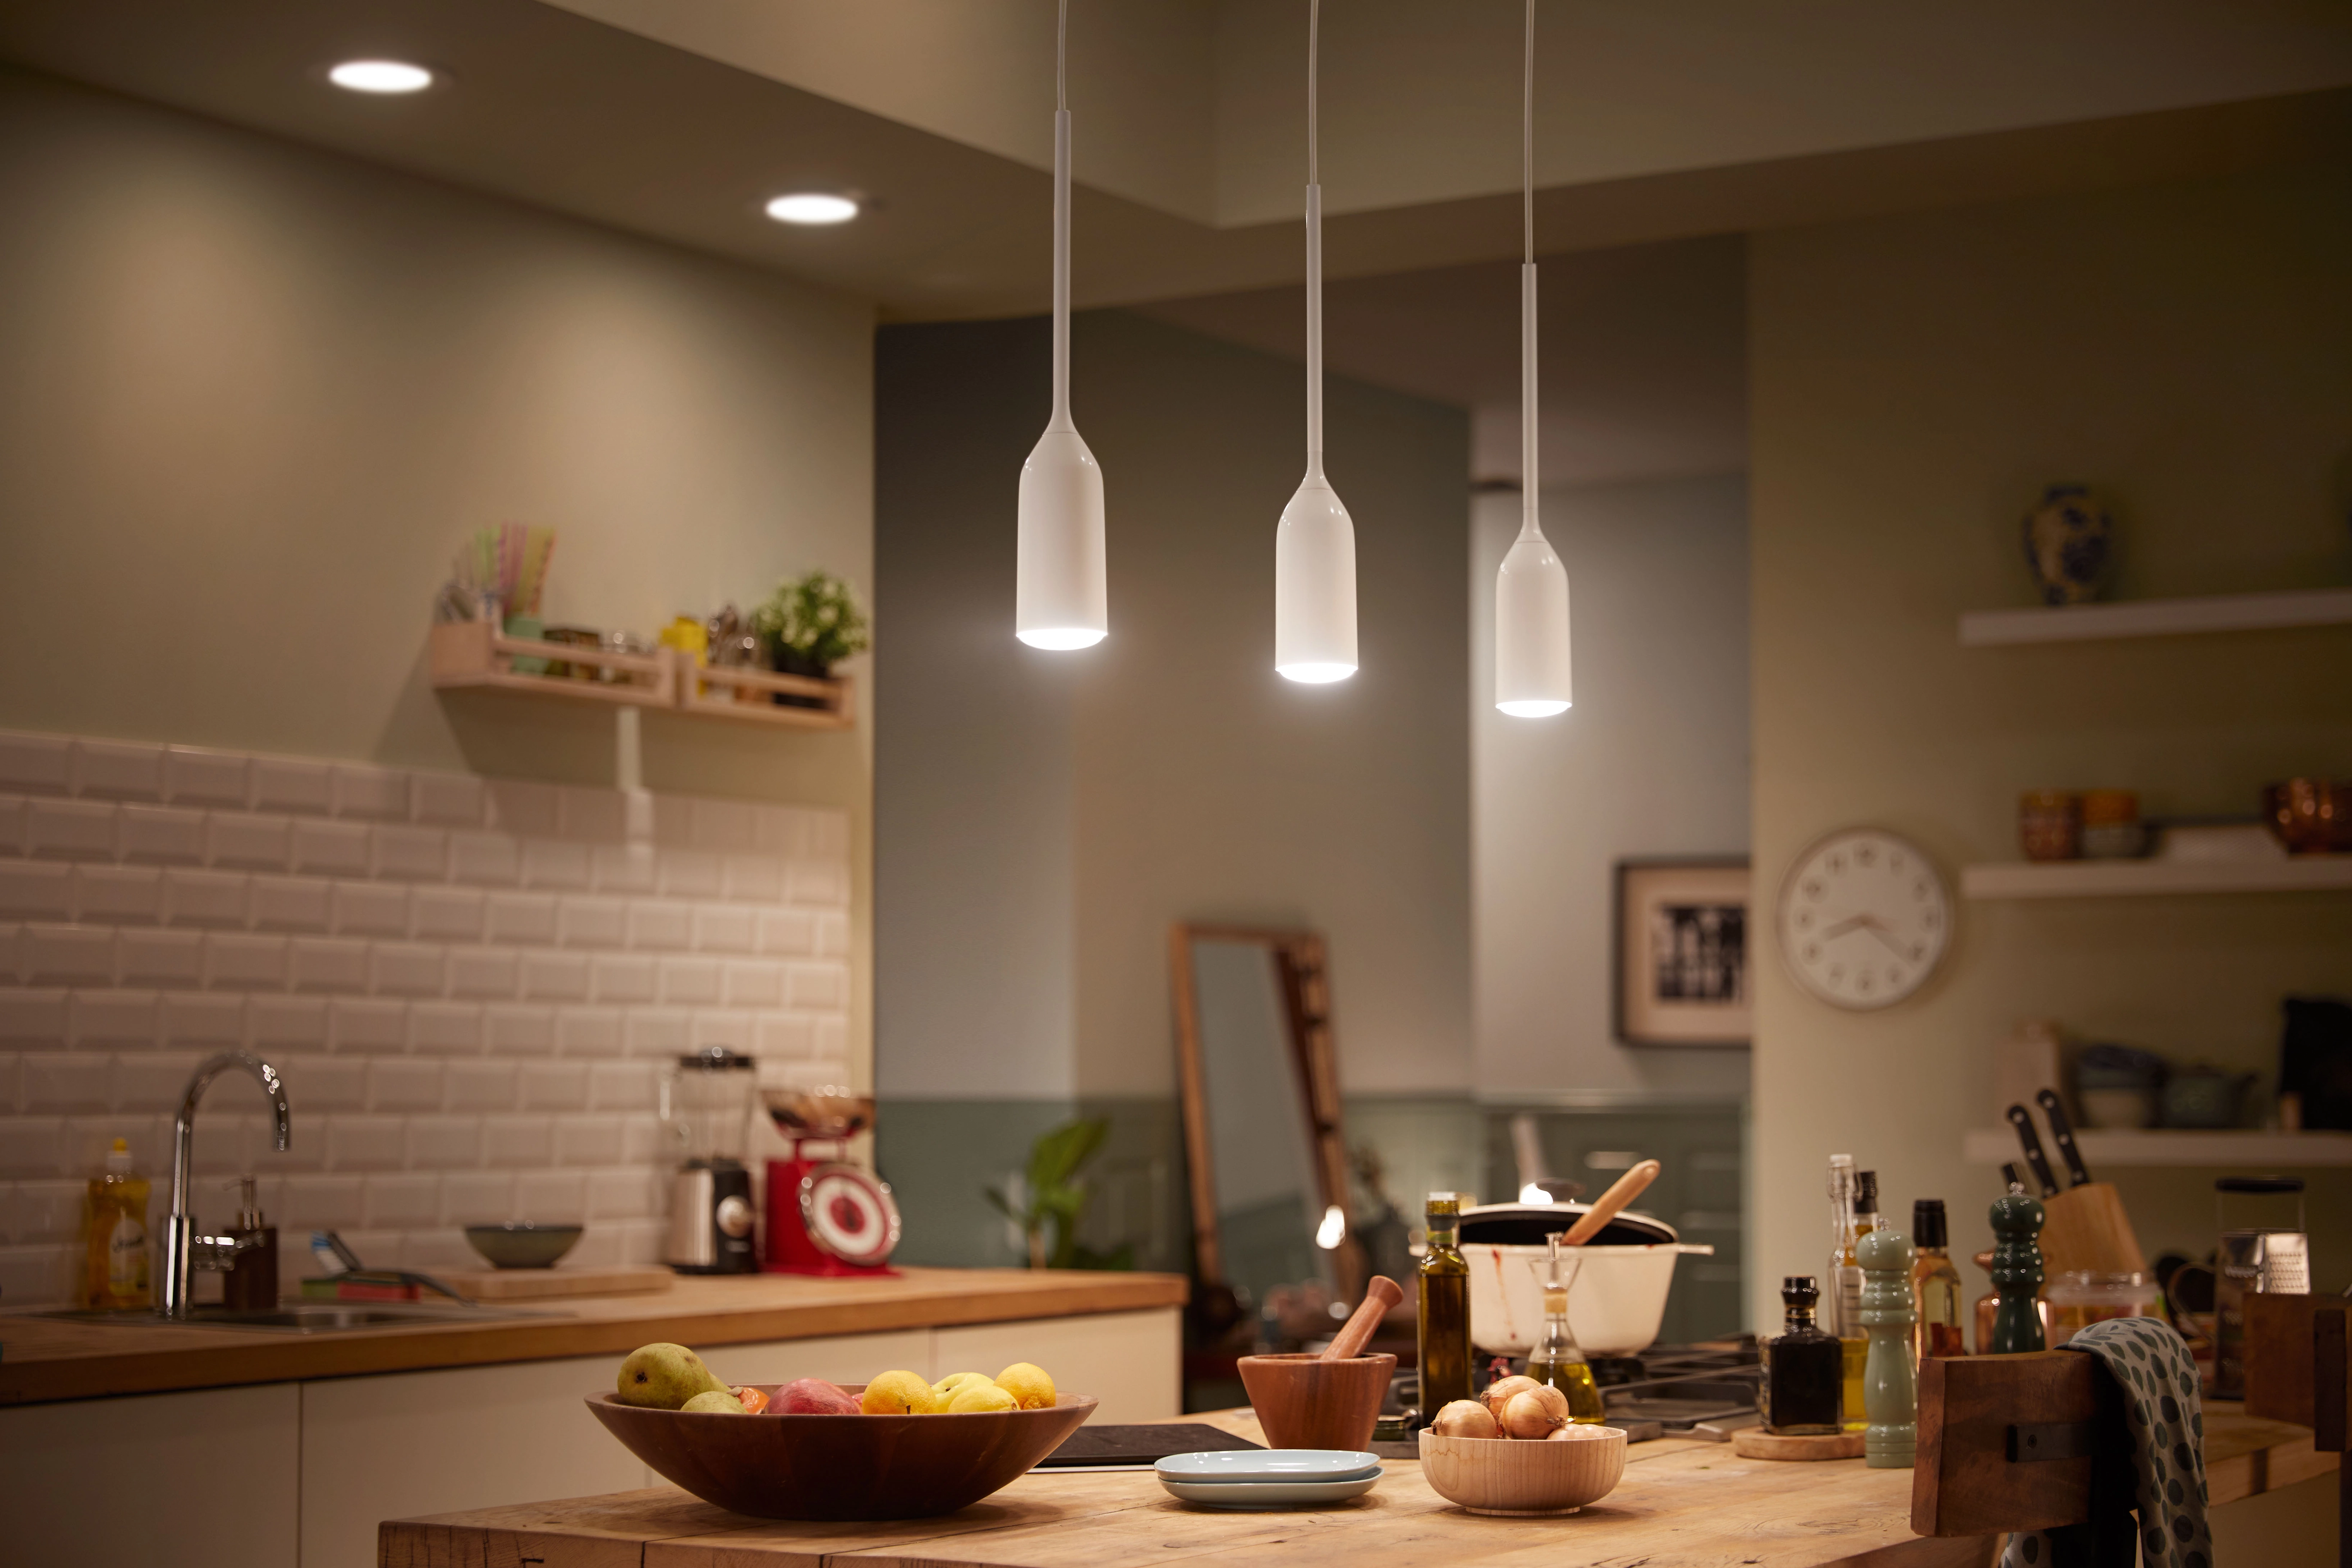 Philips Hue LED-Pendelleuchte Devote White Ambiance inkl. Dimmer Weiß